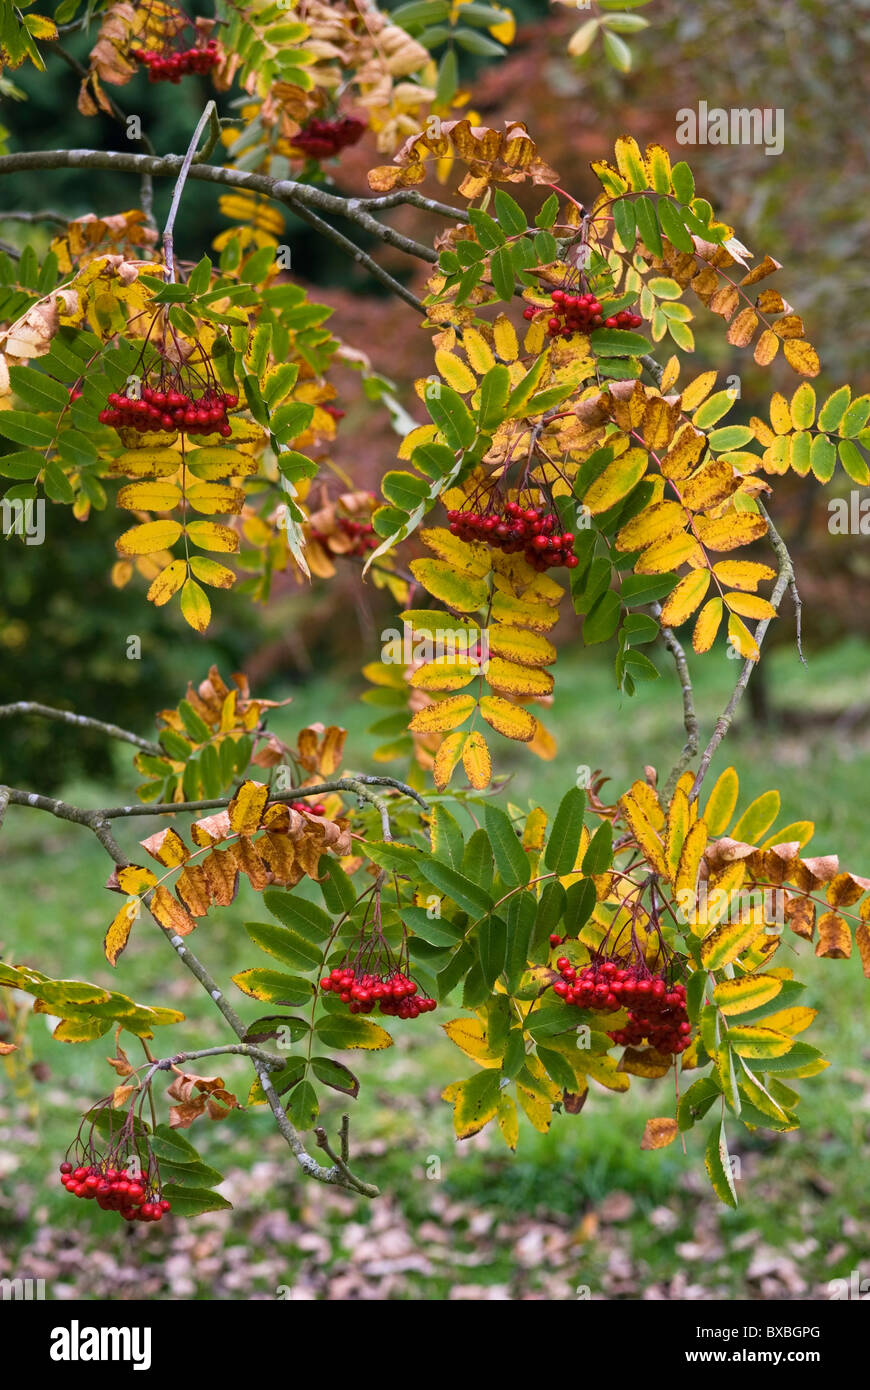 SORBUS DECORA SHOWY MOUNTAIN ASH WITH RED POMES OR BERRIES Stock Photo